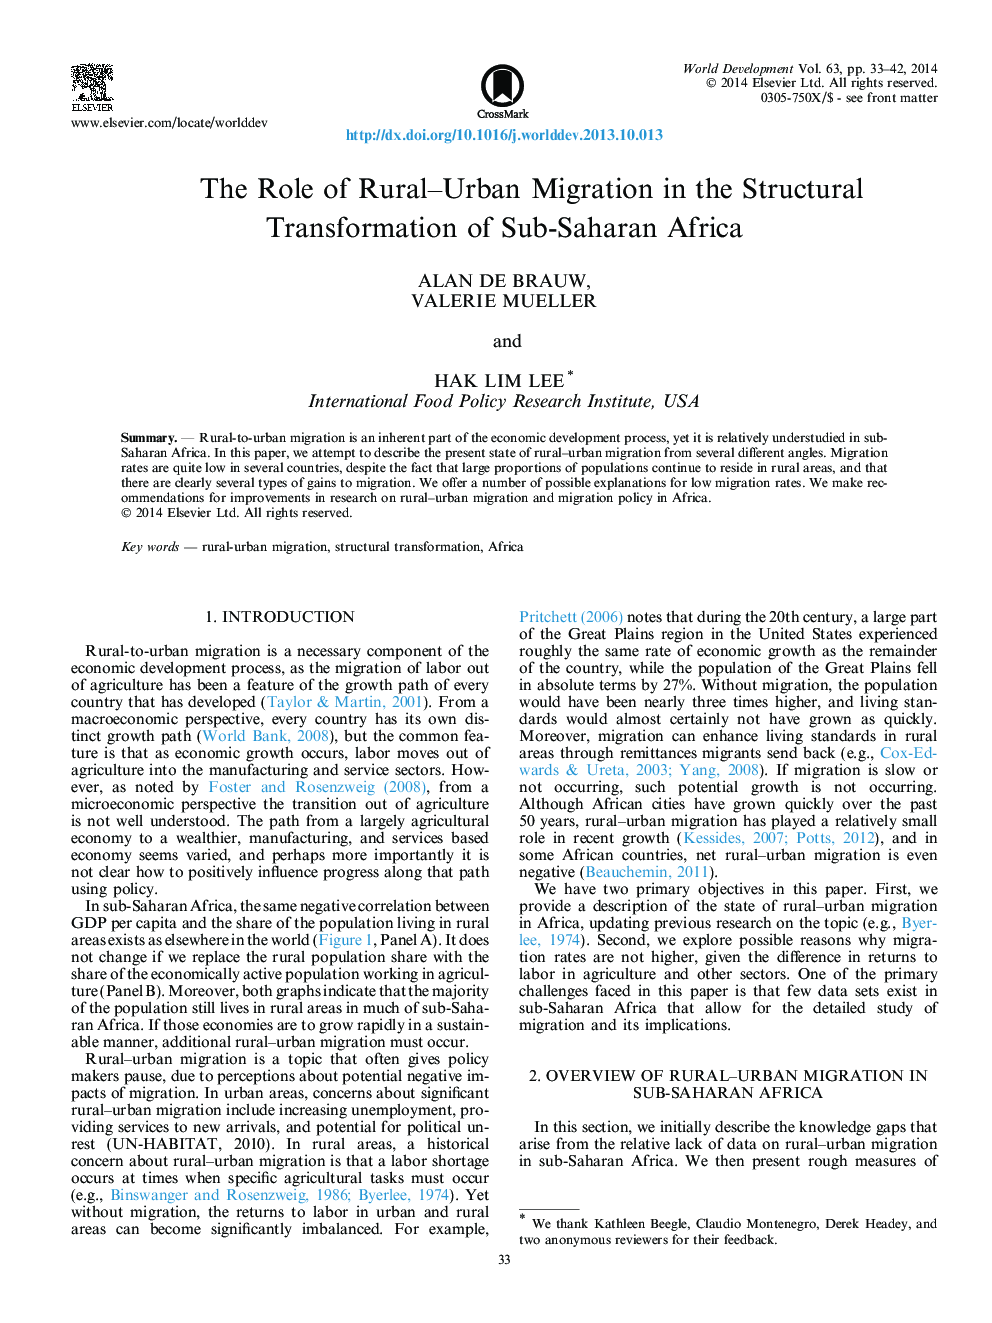 The Role of Rural–Urban Migration in the Structural Transformation of Sub-Saharan Africa ∗